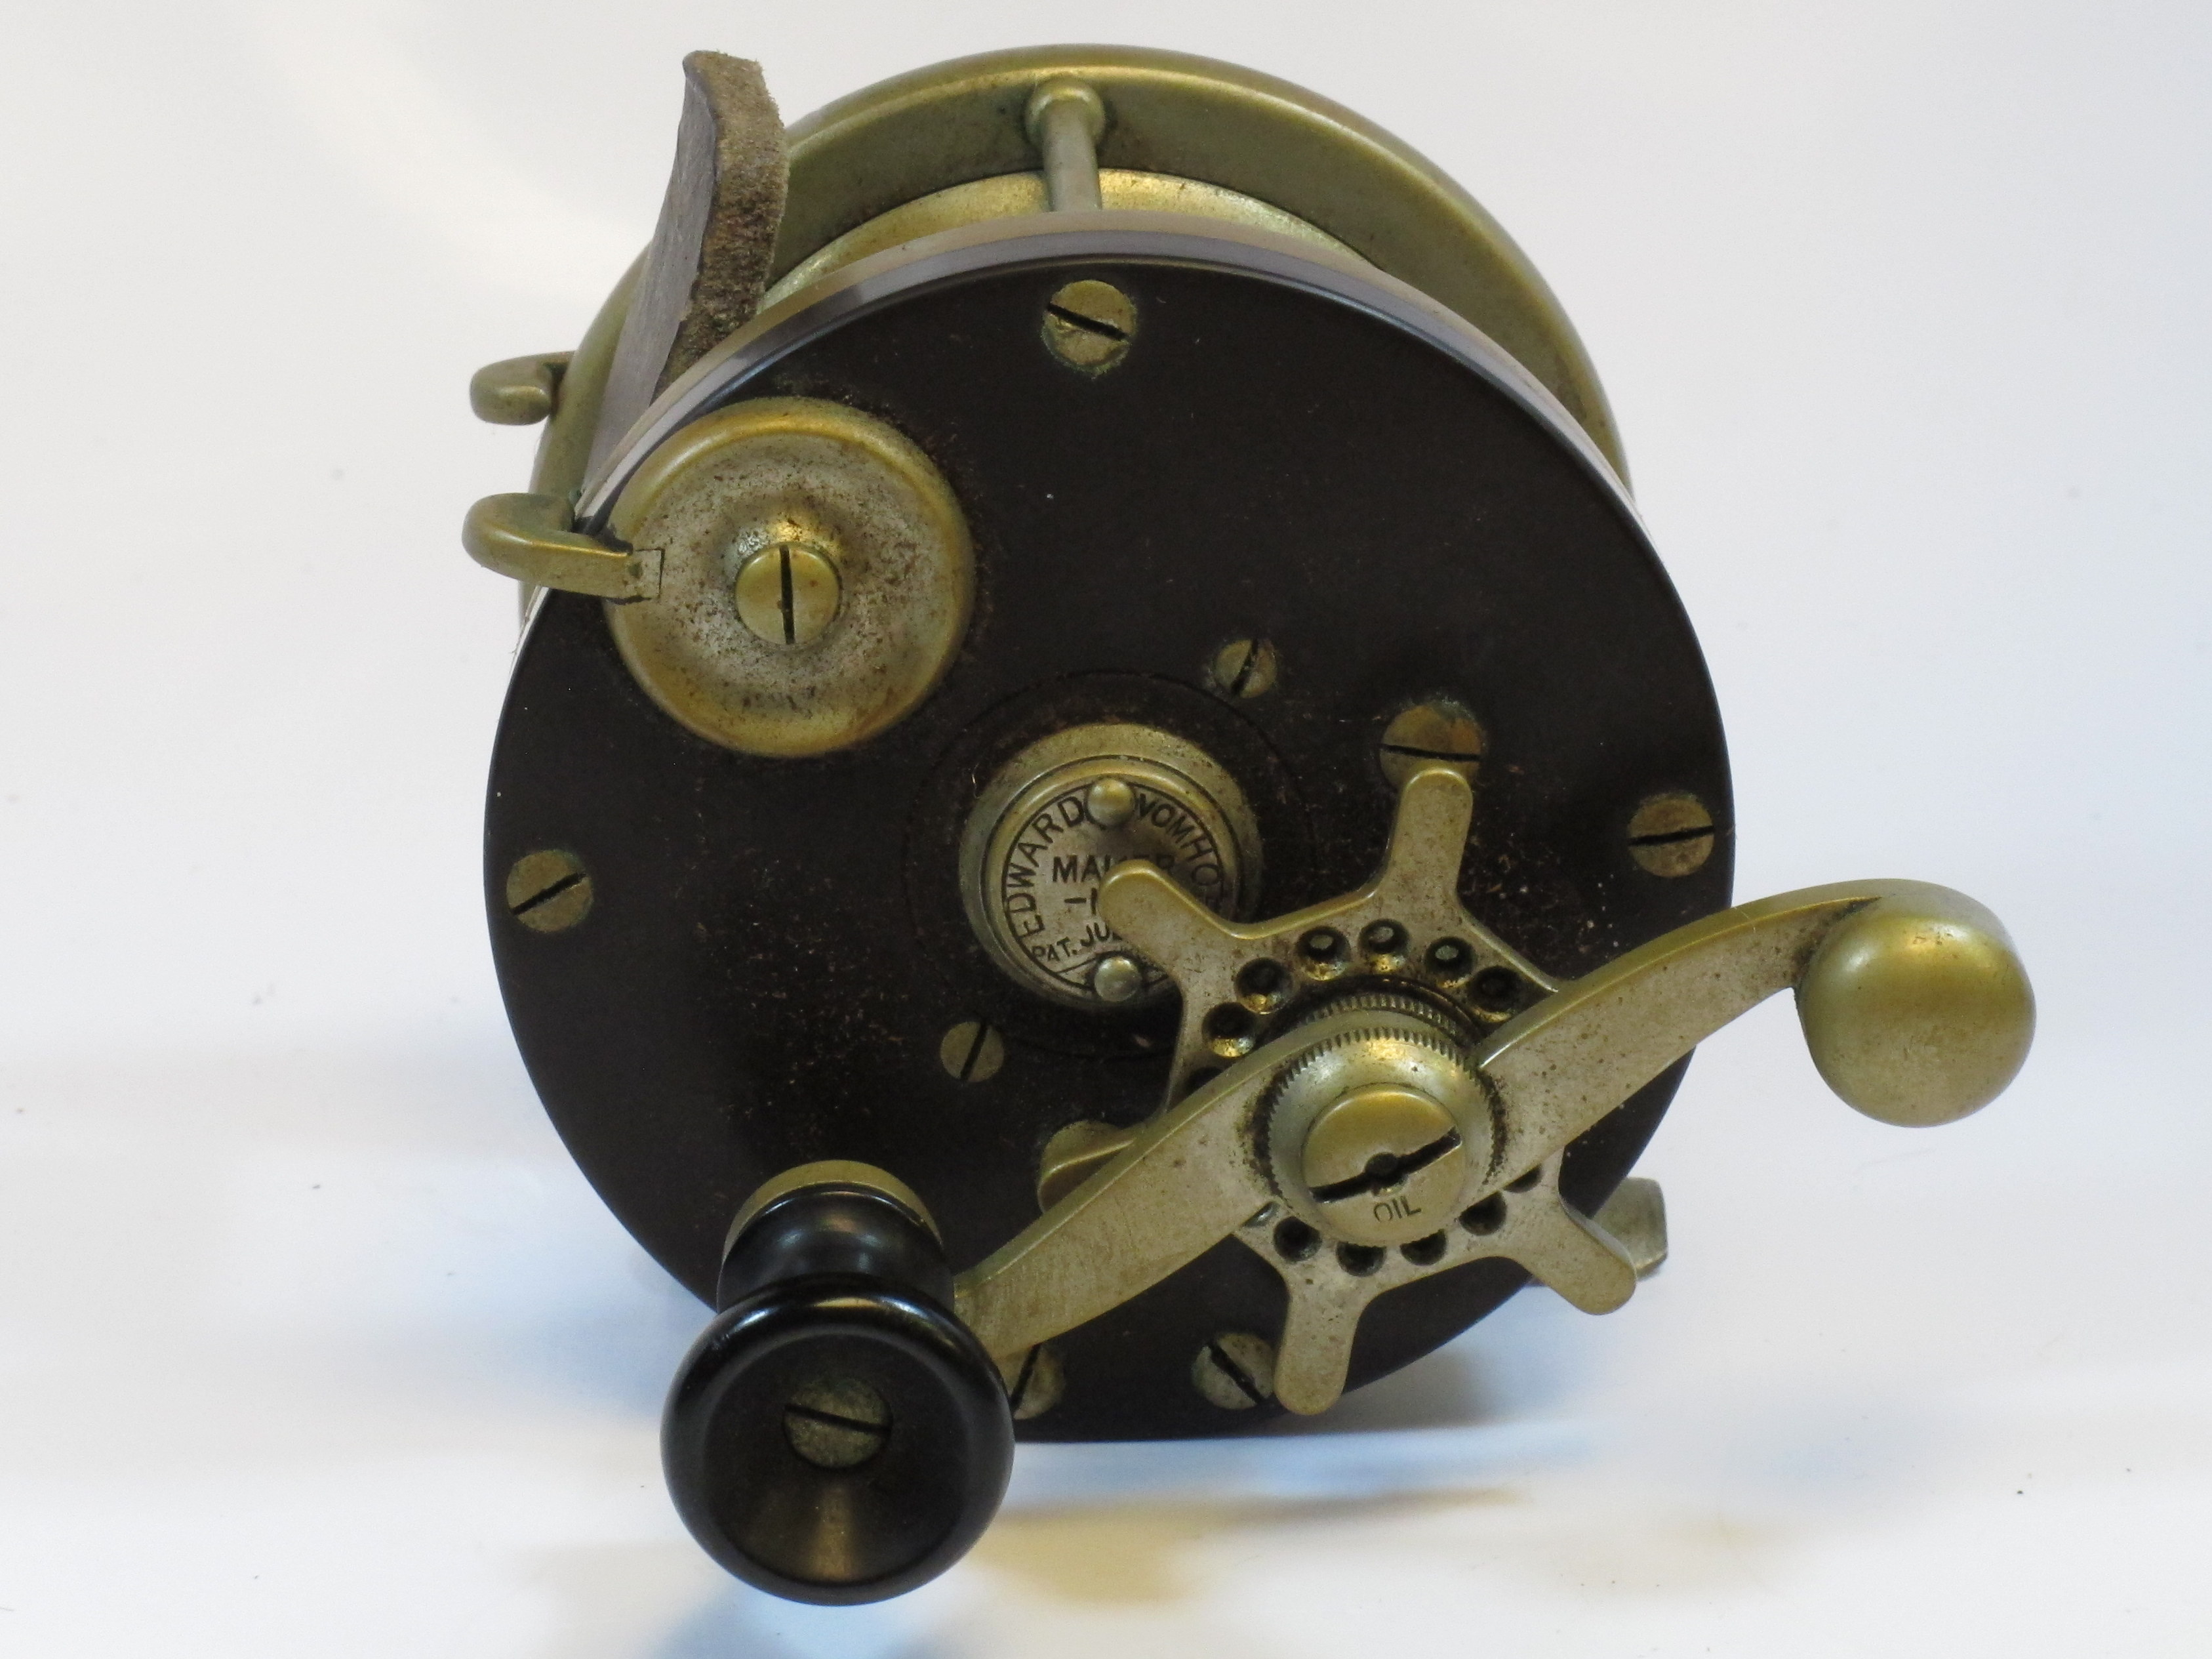 Antique Fishing Reels for sale